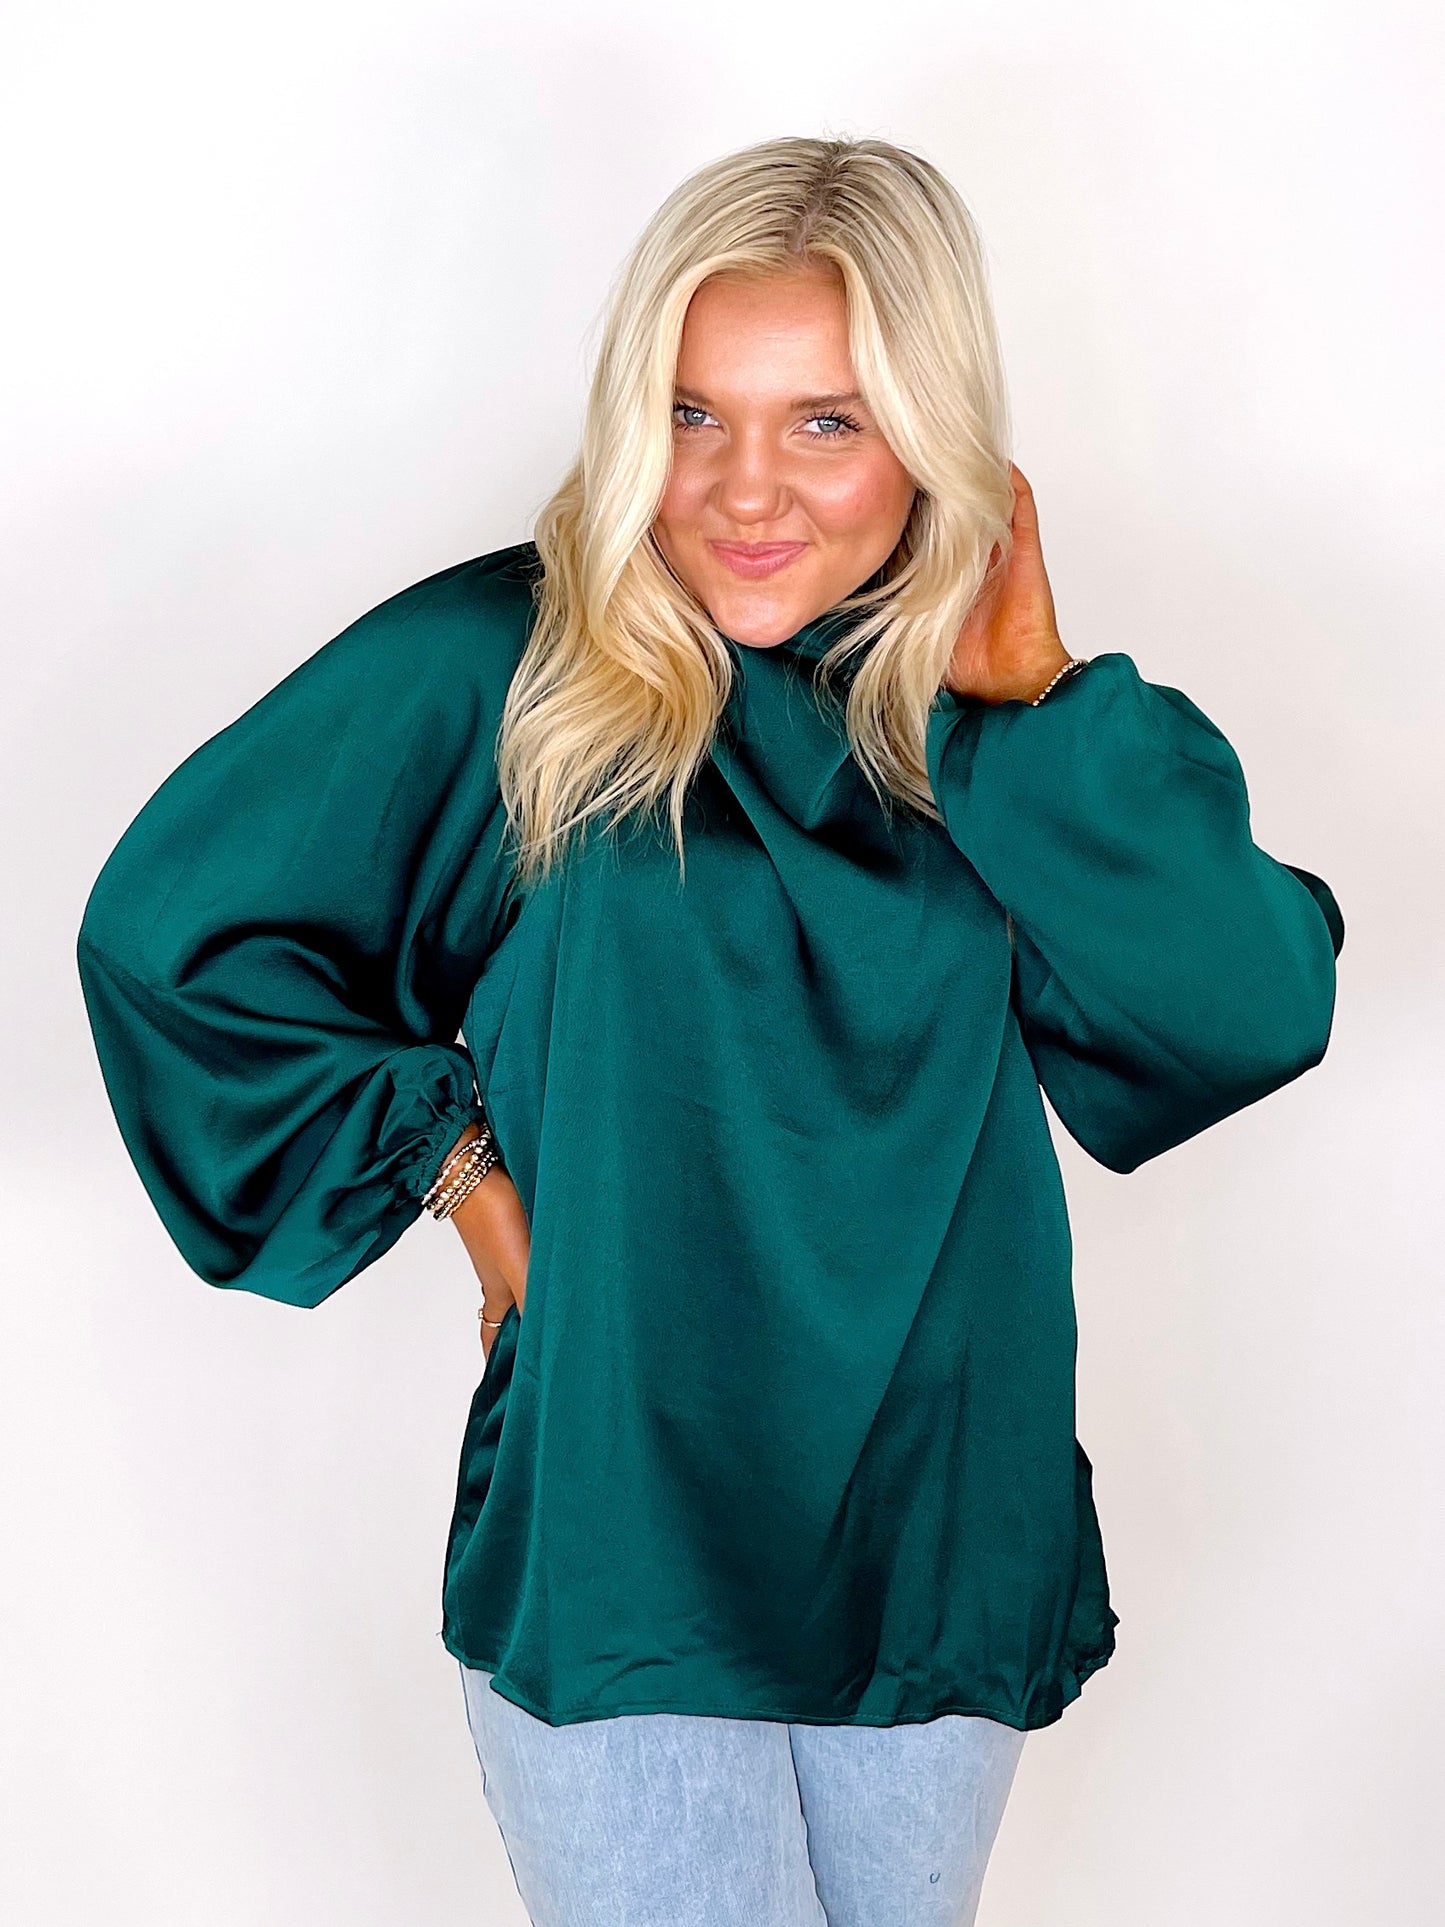 The Becca Blouse-Blouse-Entro-The Village Shoppe, Women’s Fashion Boutique, Shop Online and In Store - Located in Muscle Shoals, AL.